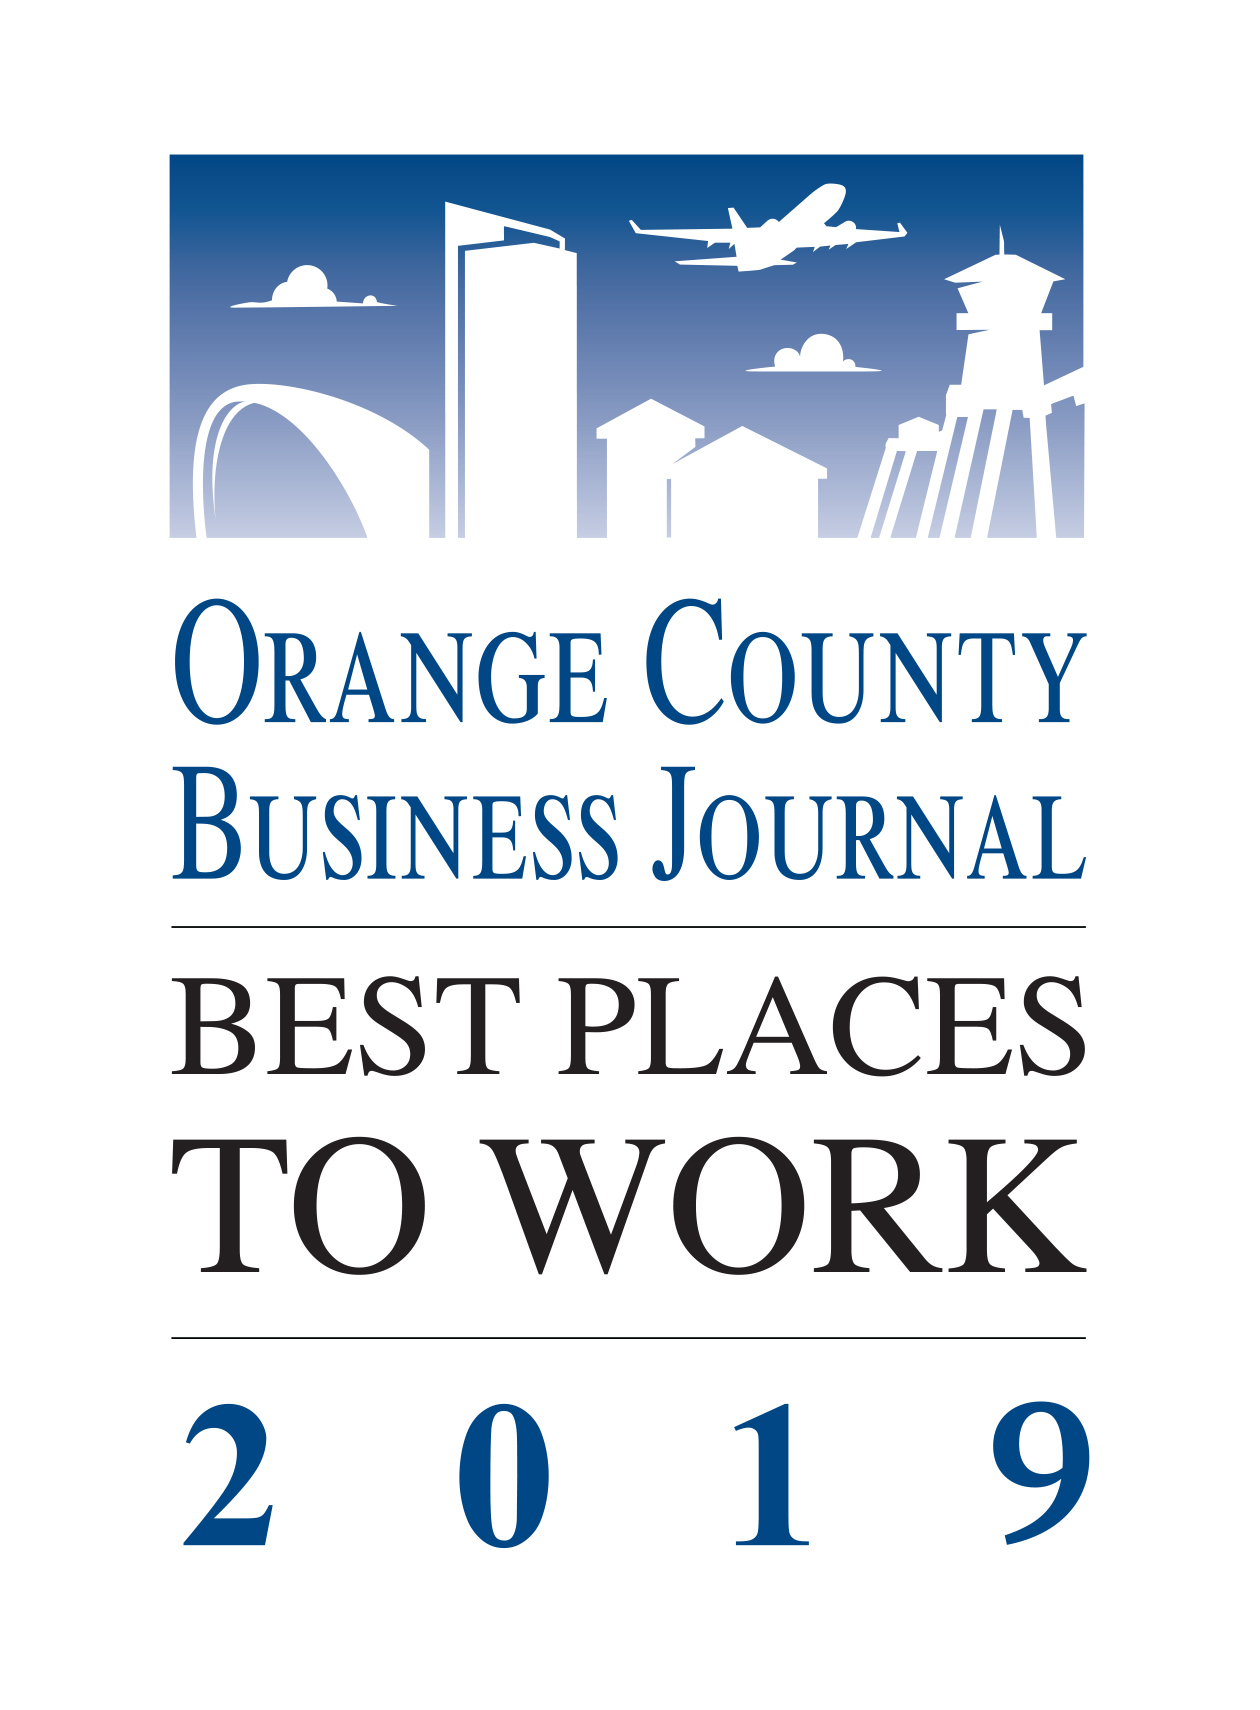 best place to work award logo 2019